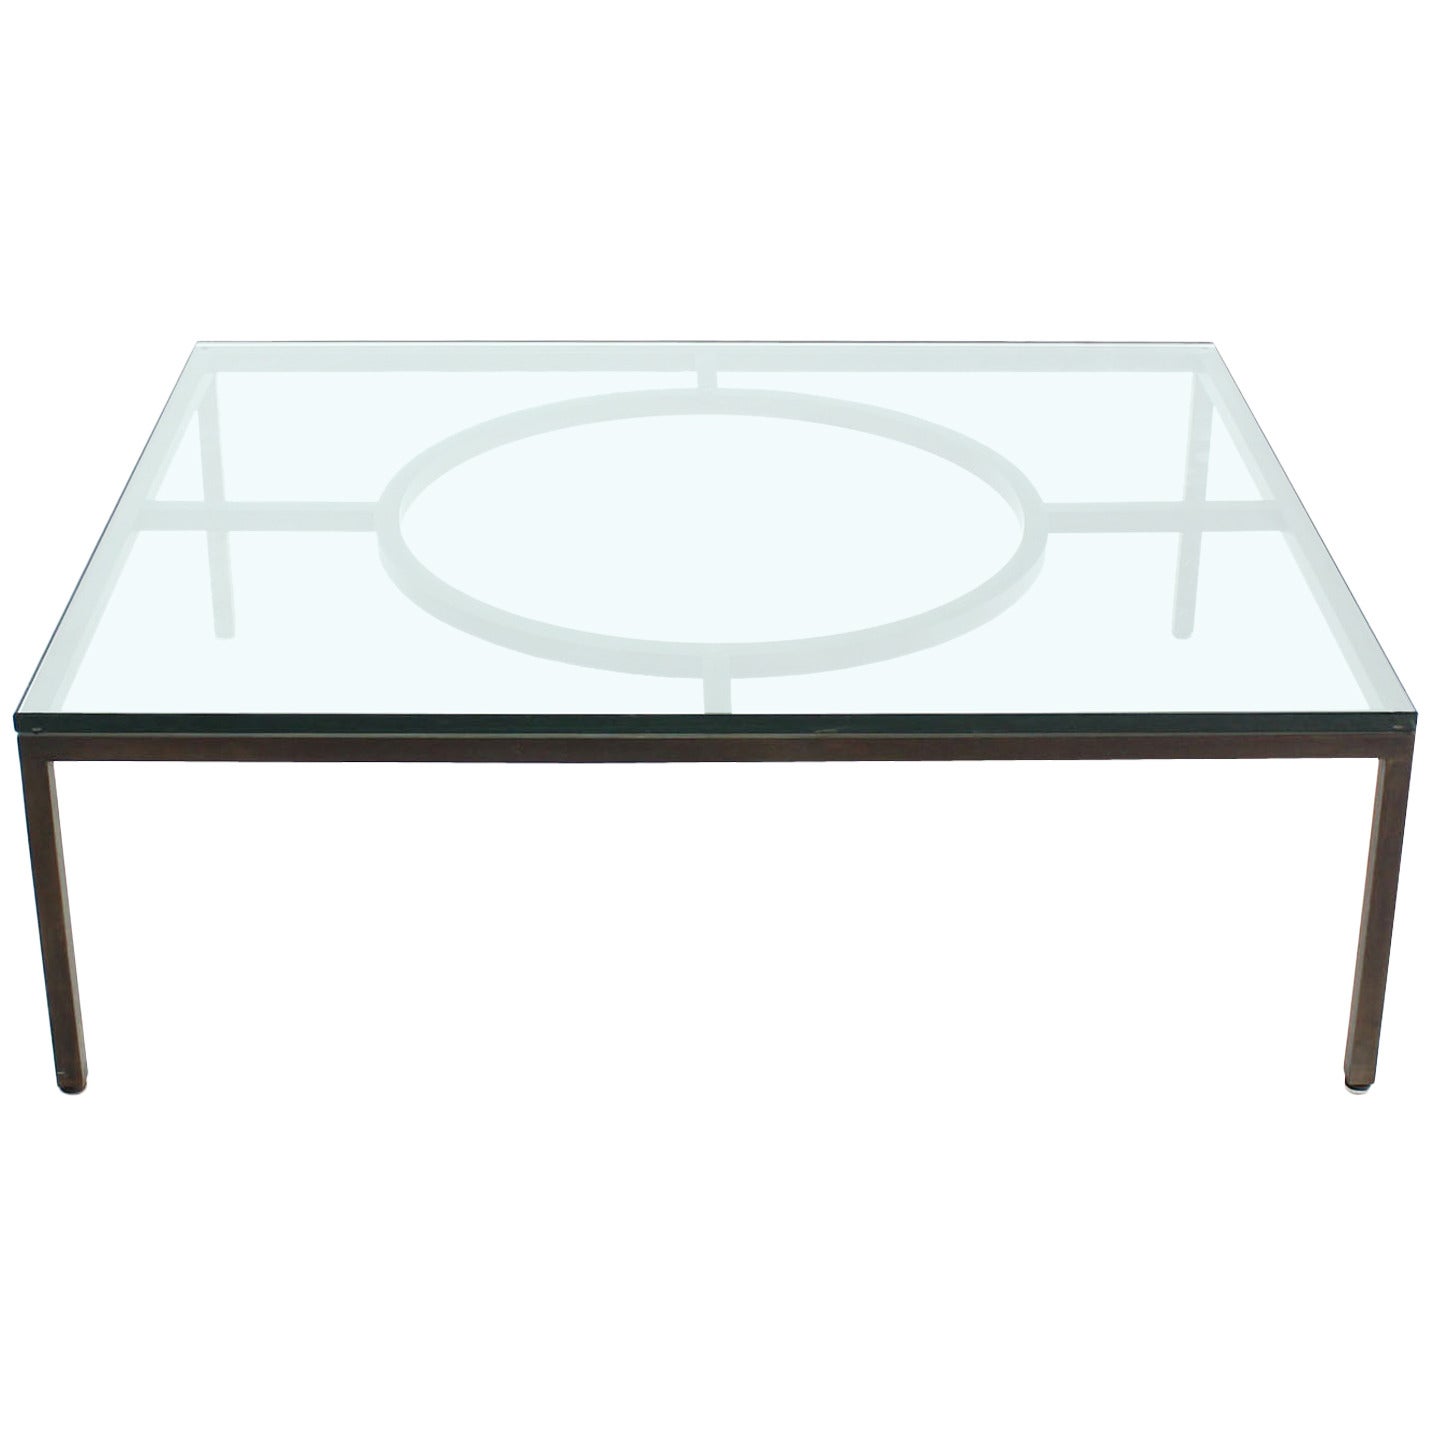 Extra Large Wide Rectangle Bronzed Frame Modern Coffee Table 3/4" Thick Glass For Sale